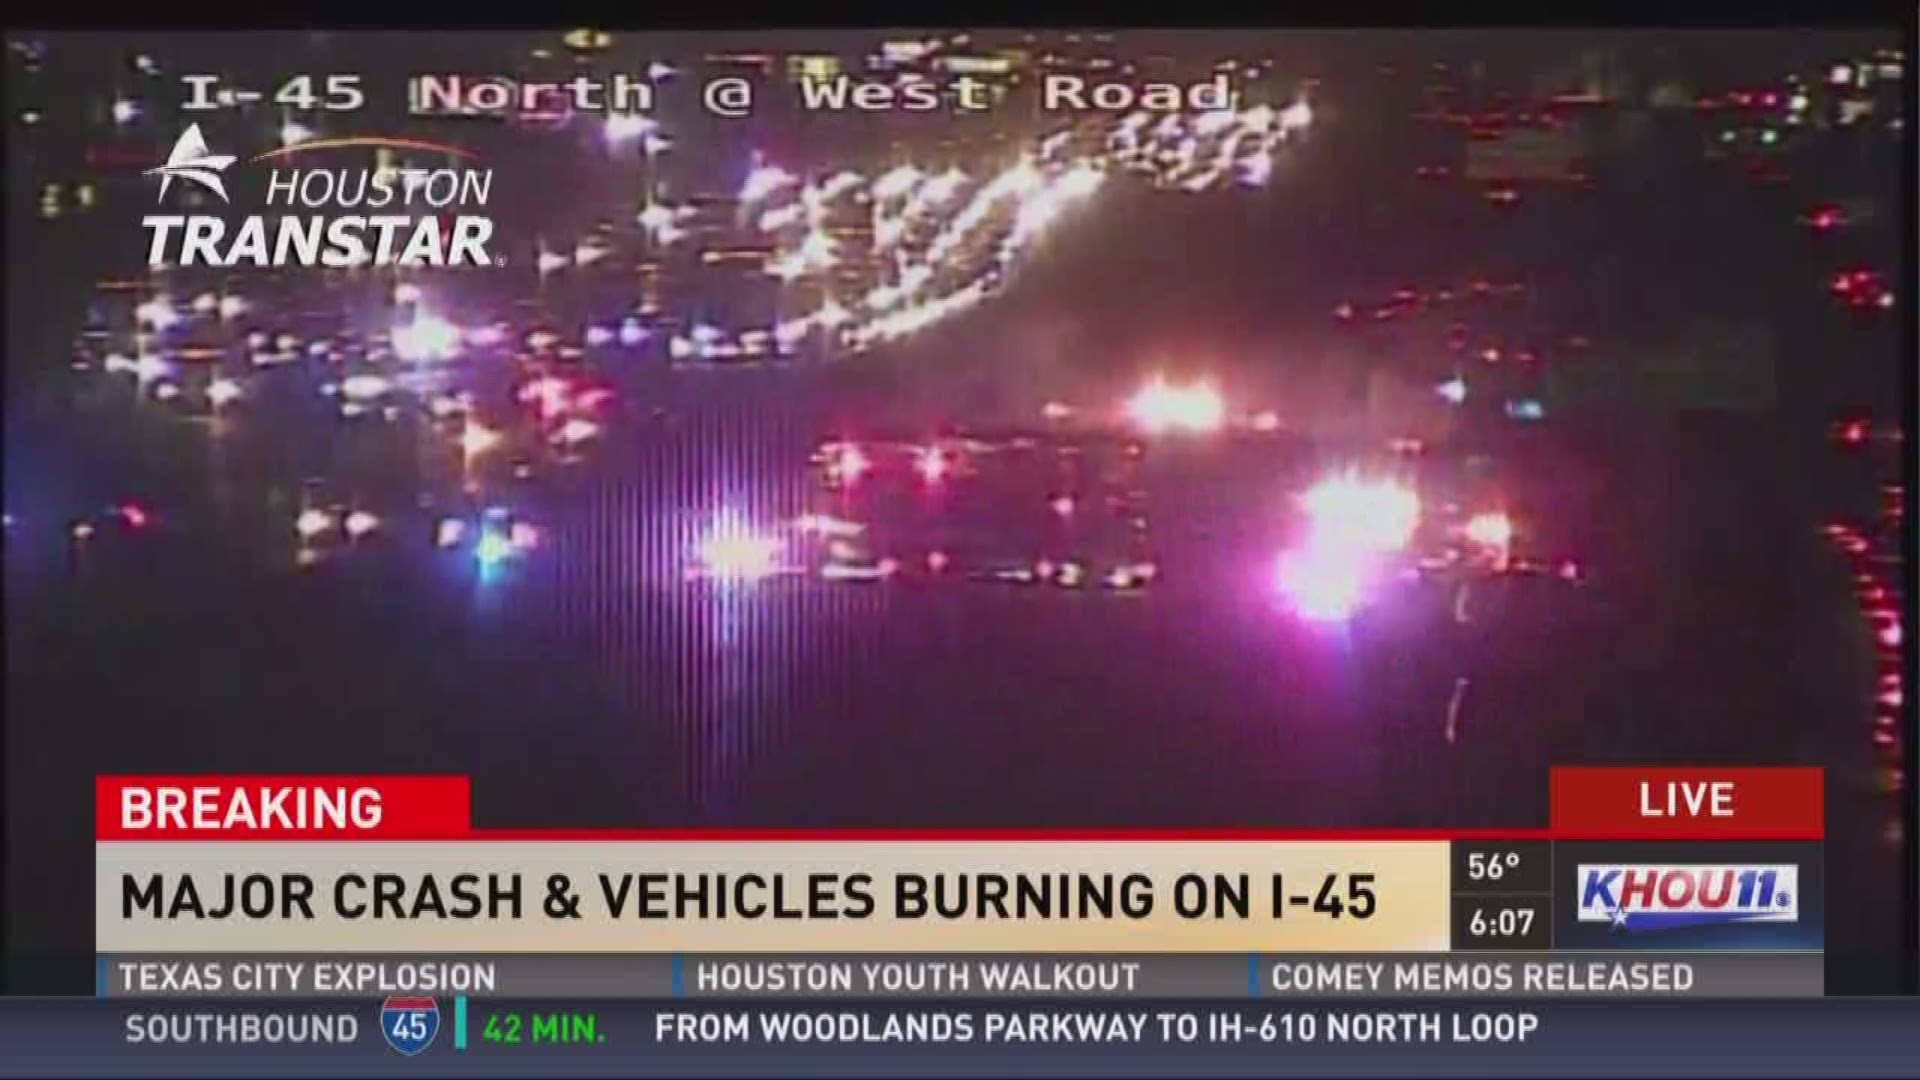 An 18-wheeler crash on the southbound lanes of Interstate 45 has caused a massive fire with multiple traffic lanes shutting down.